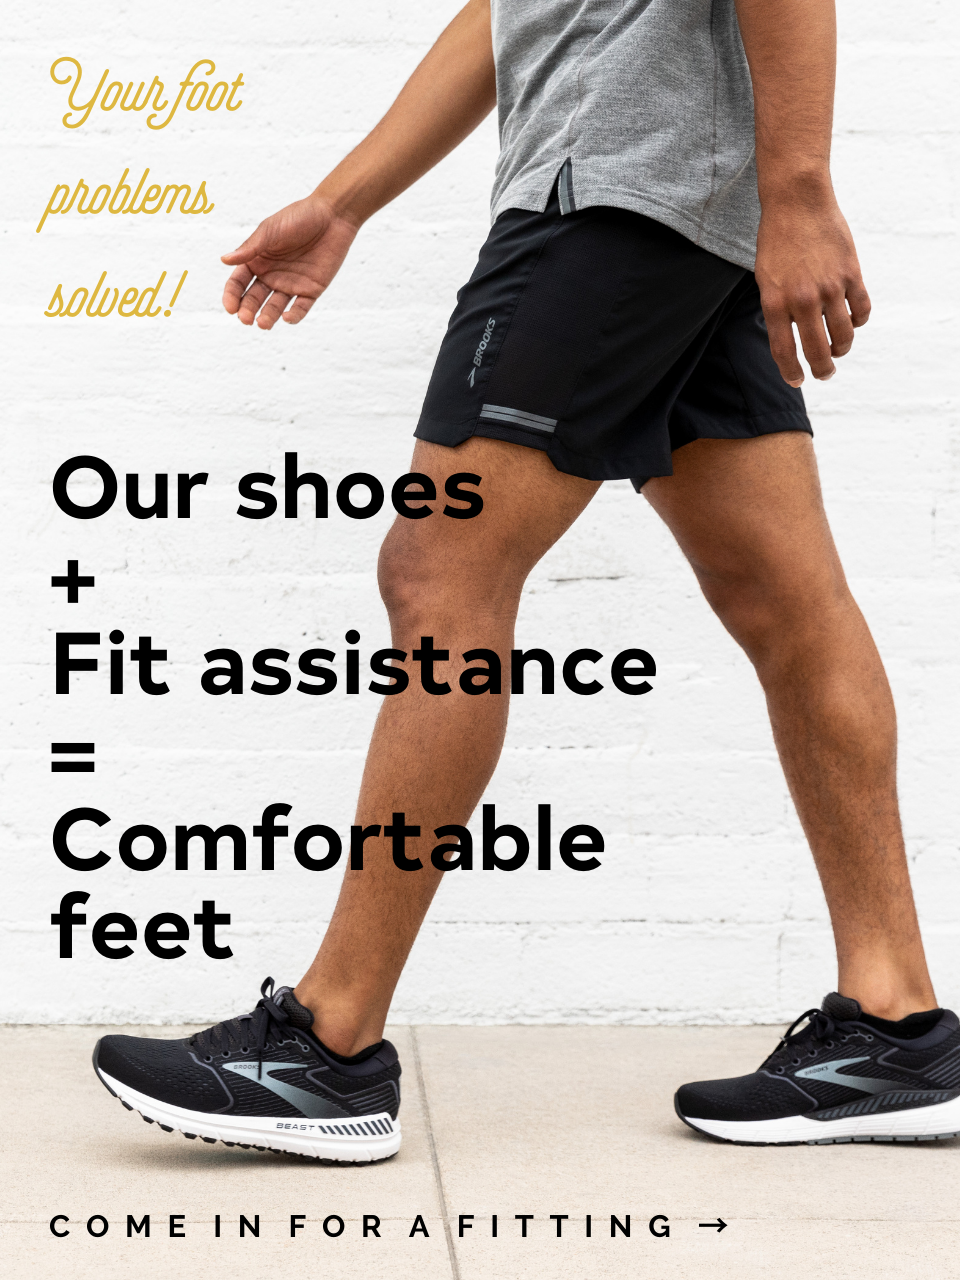 Your foot problems solved! Our shoes plus fit assistance equal comfortable feet. Come in for a fitting.